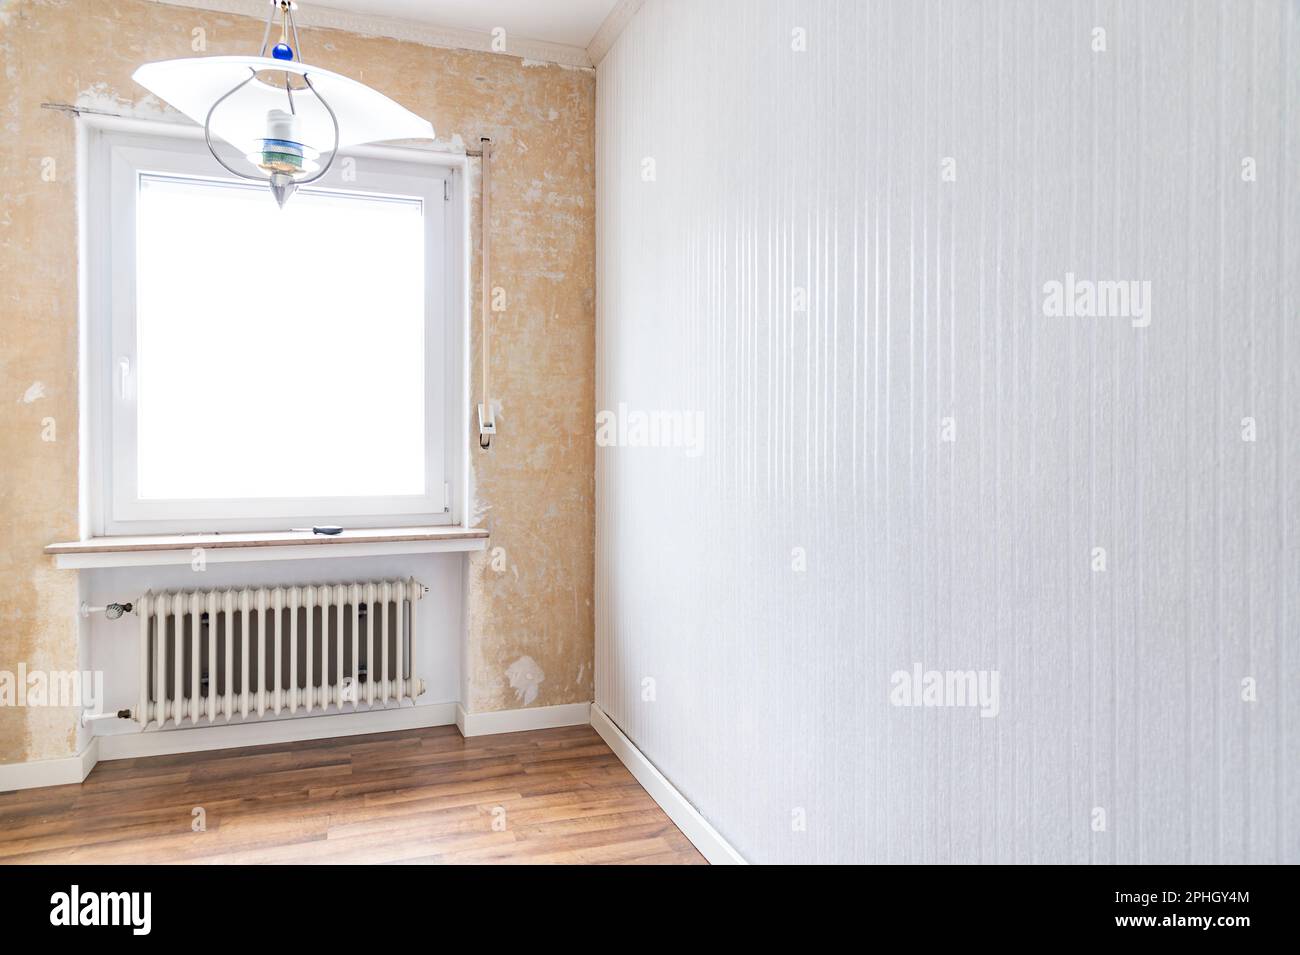 One room was partially renovated. The left side is still without wall covering. On the right, a new striped wallpaper was applied. Old ribbed radiator Stock Photo